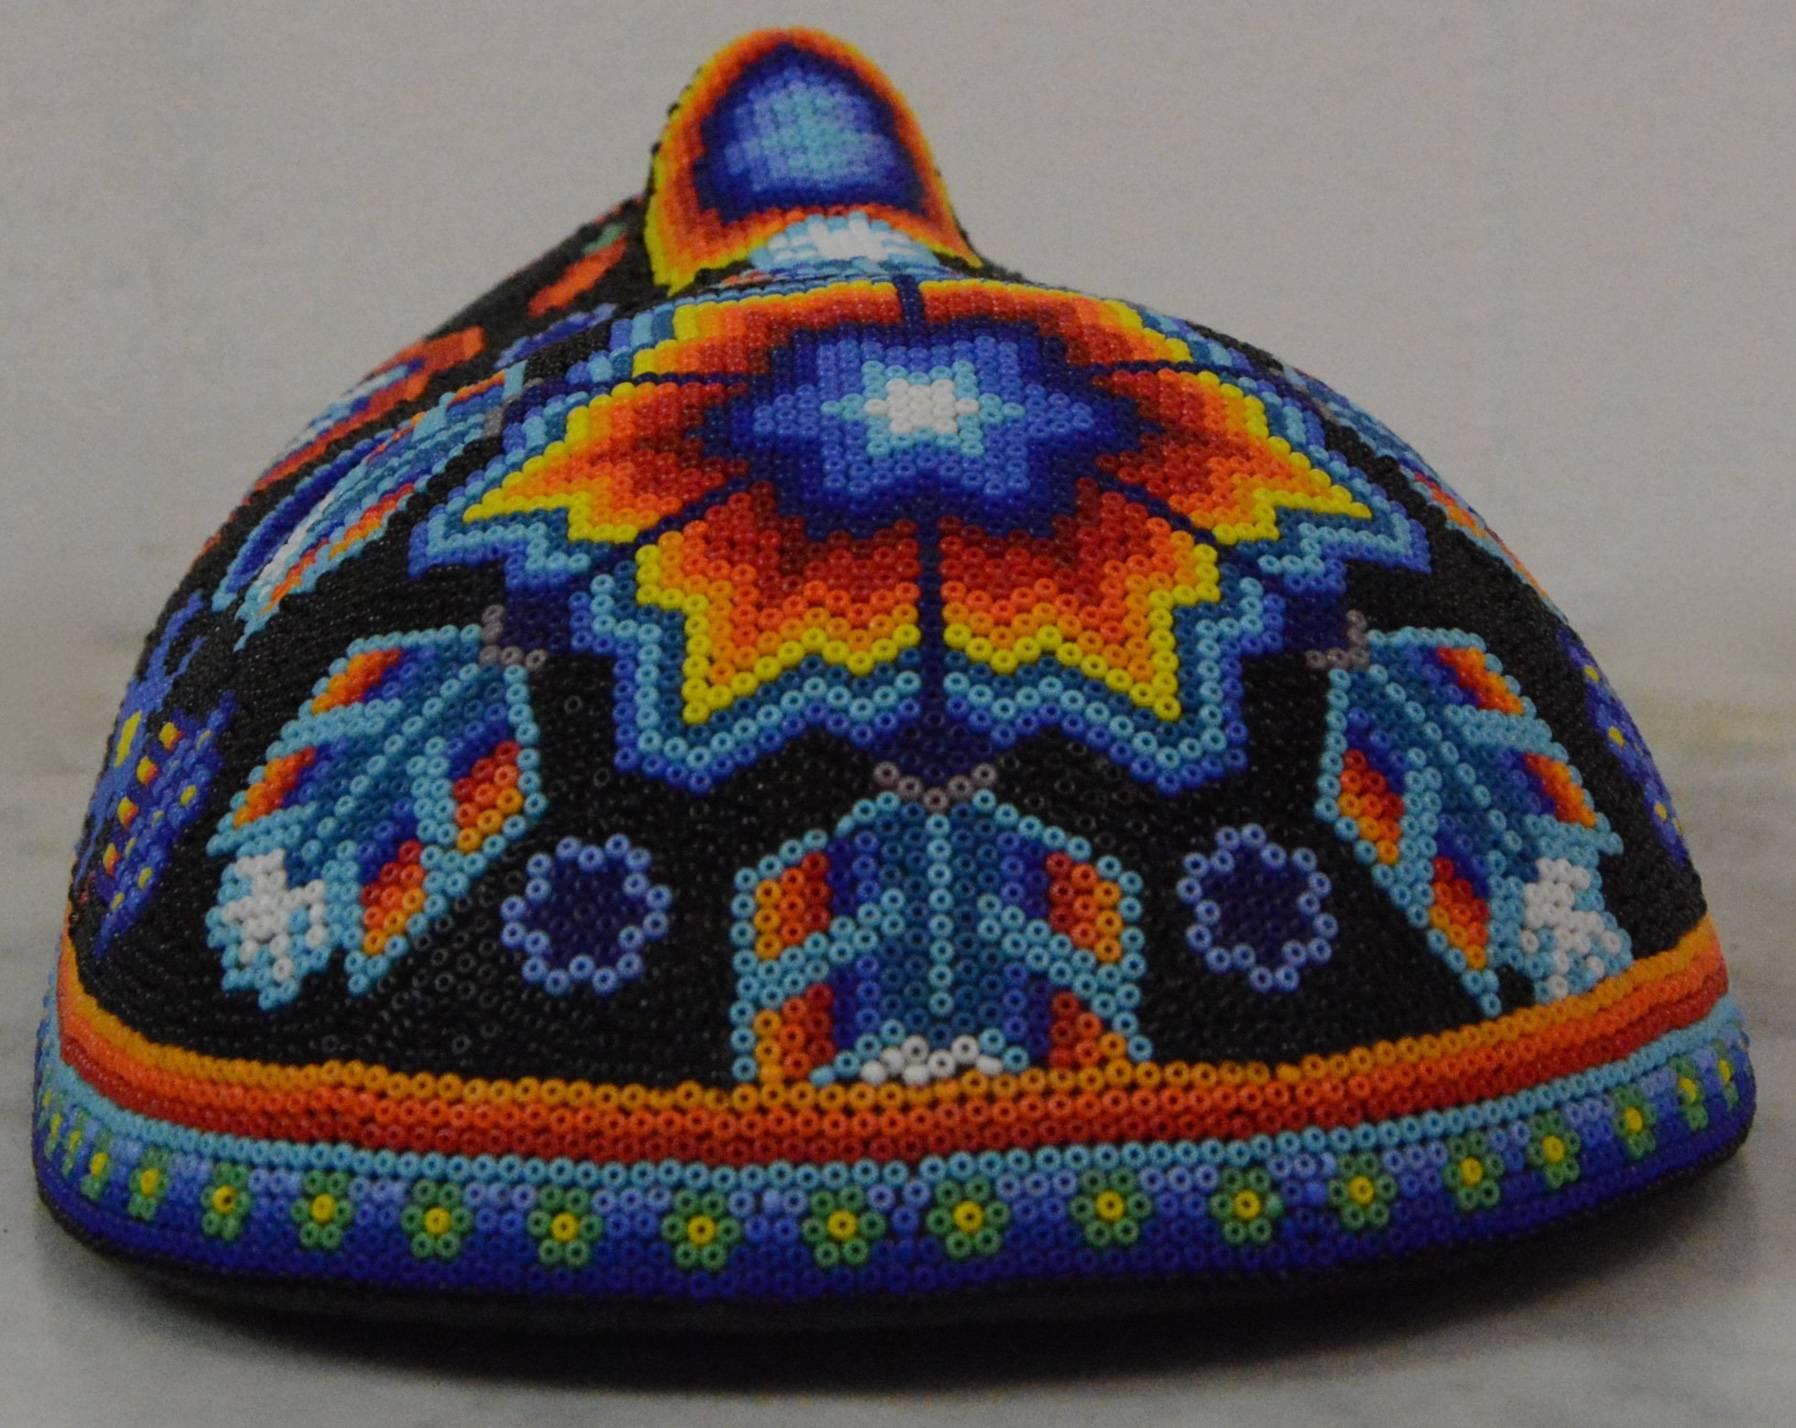 This is a colorful hand beaded Huichol Folk Art masks called Sacred Star Man. The mask features intricate tribal-like designs throughout that are comprised of glass beads in vibrant shades of red, orange, yellow, green, blue, purple, black, and